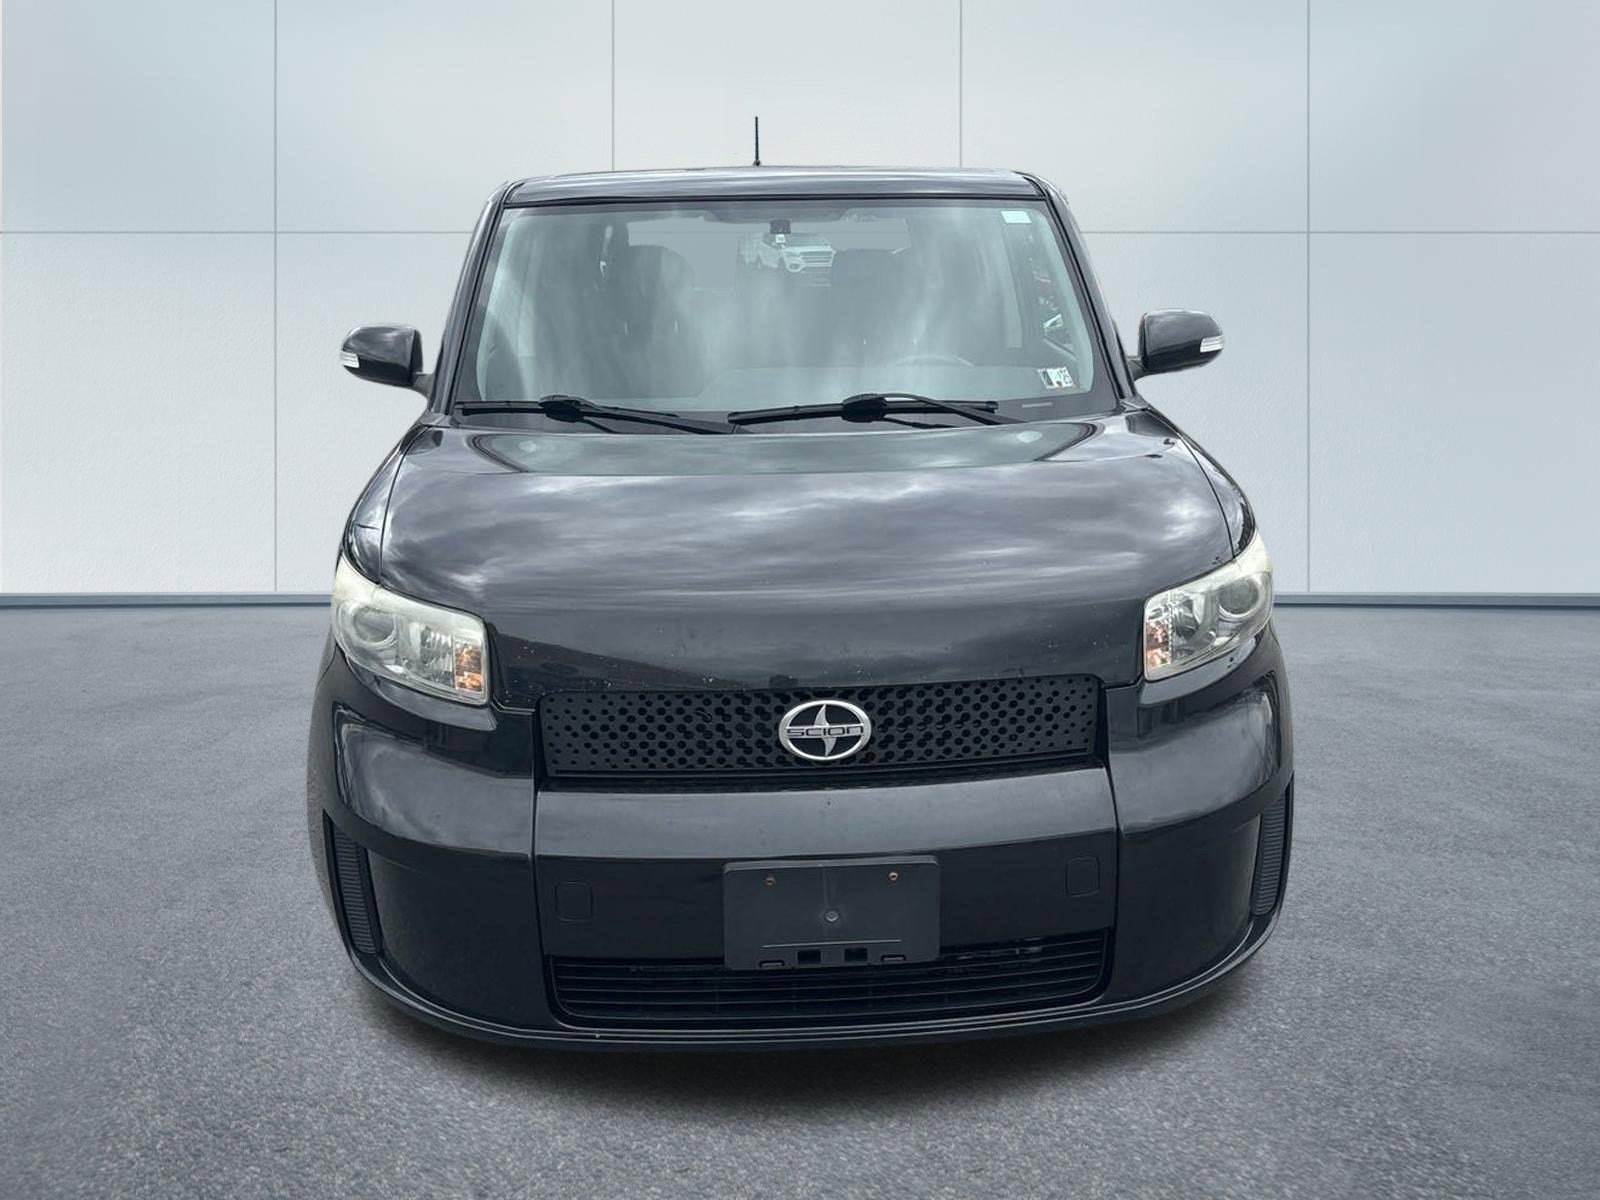 Used 2008 Scion xB  with VIN JTLKE50EX81009740 for sale in Lewistown, PA